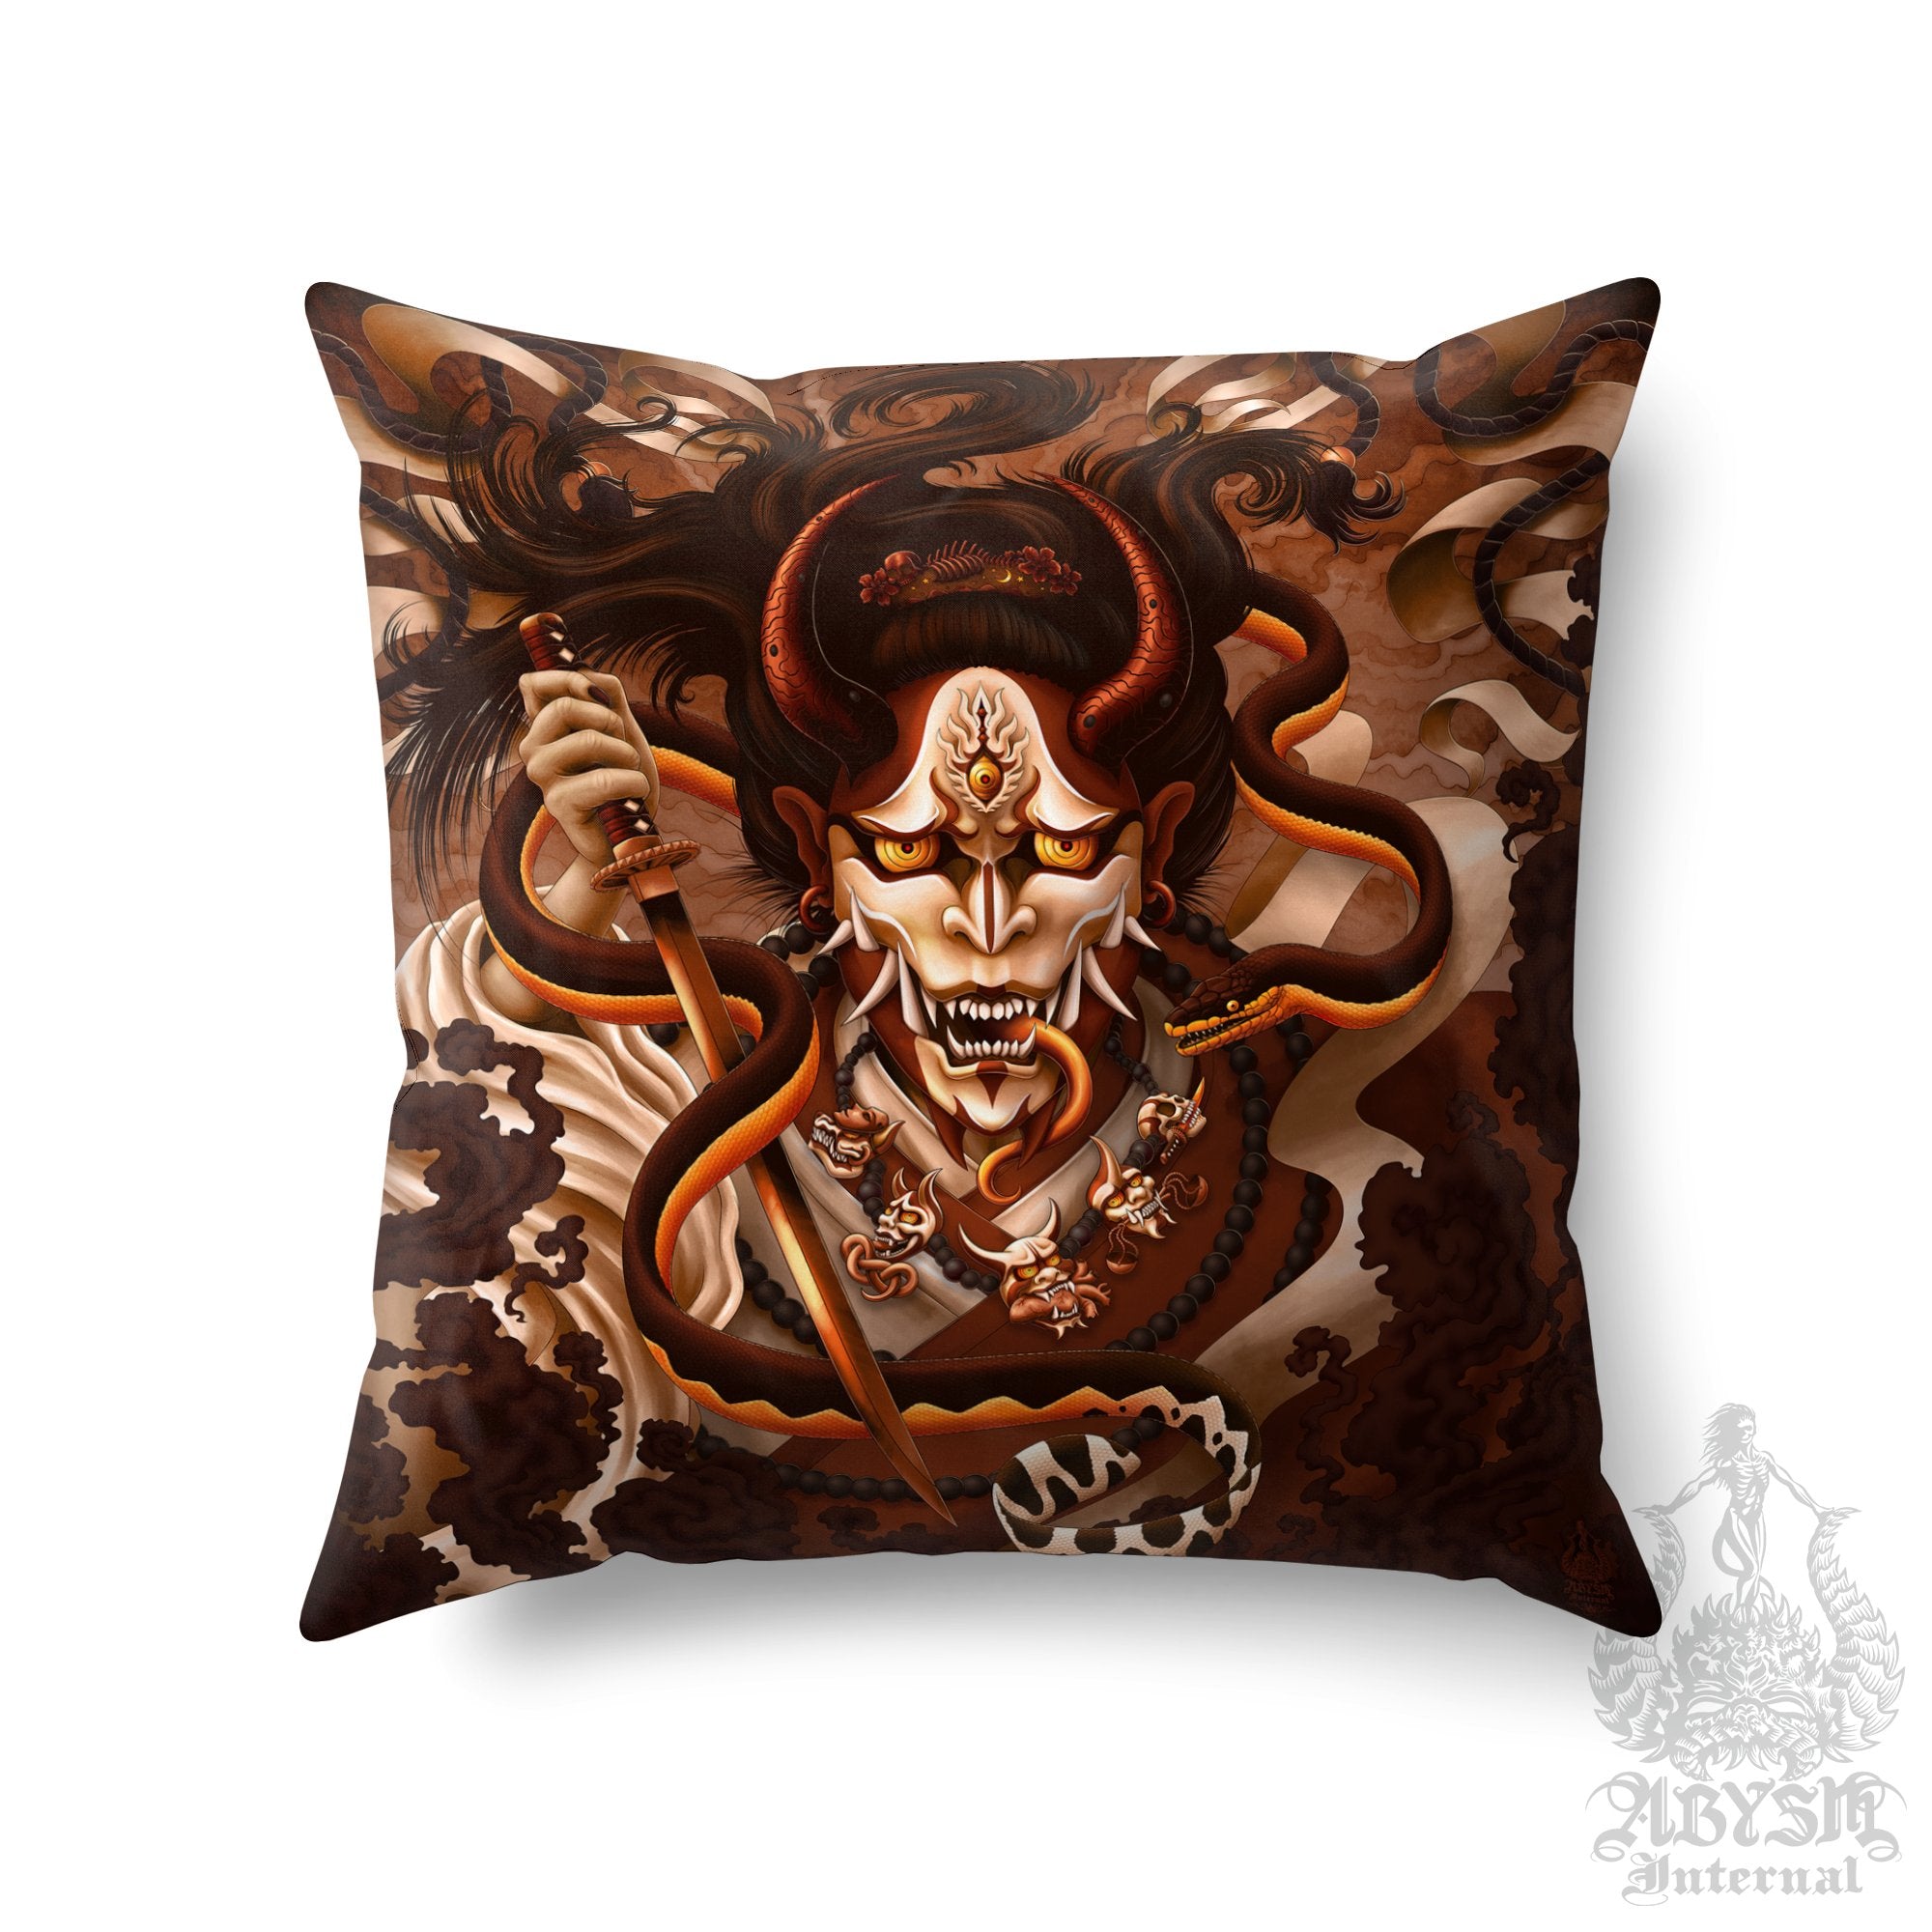 Hannya Throw Pillow, Decorative Accent Pillow, Square Cushion Cover, Japanese Demon & Snake, Gamer Room Decor - Cream - Abysm Internal